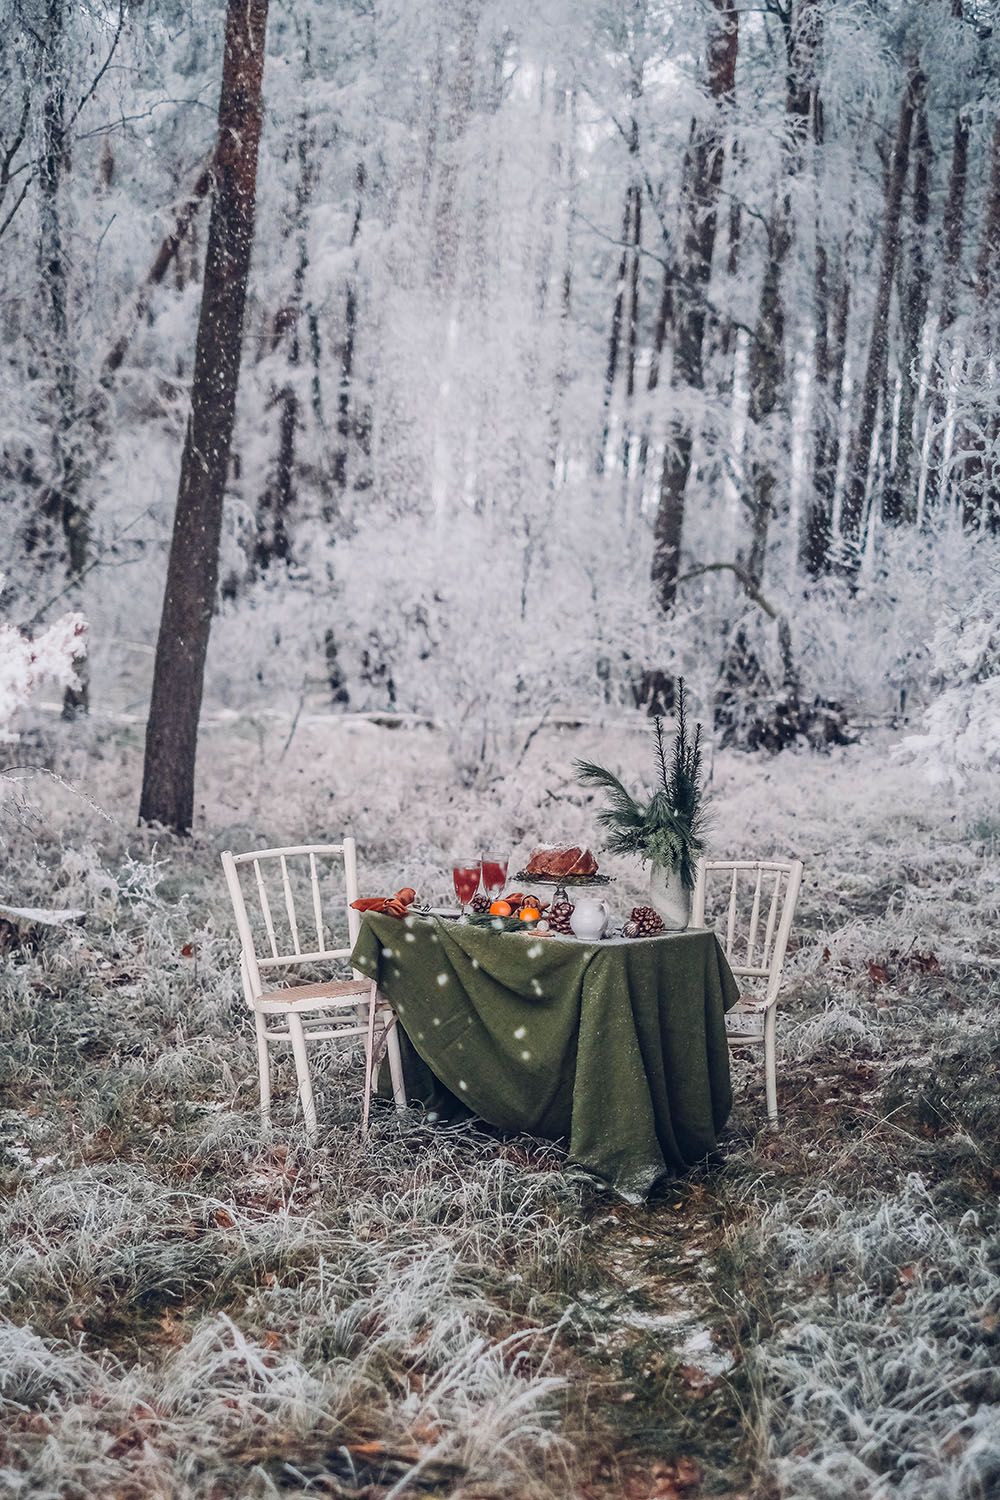 A snowy Picnic in the Woods